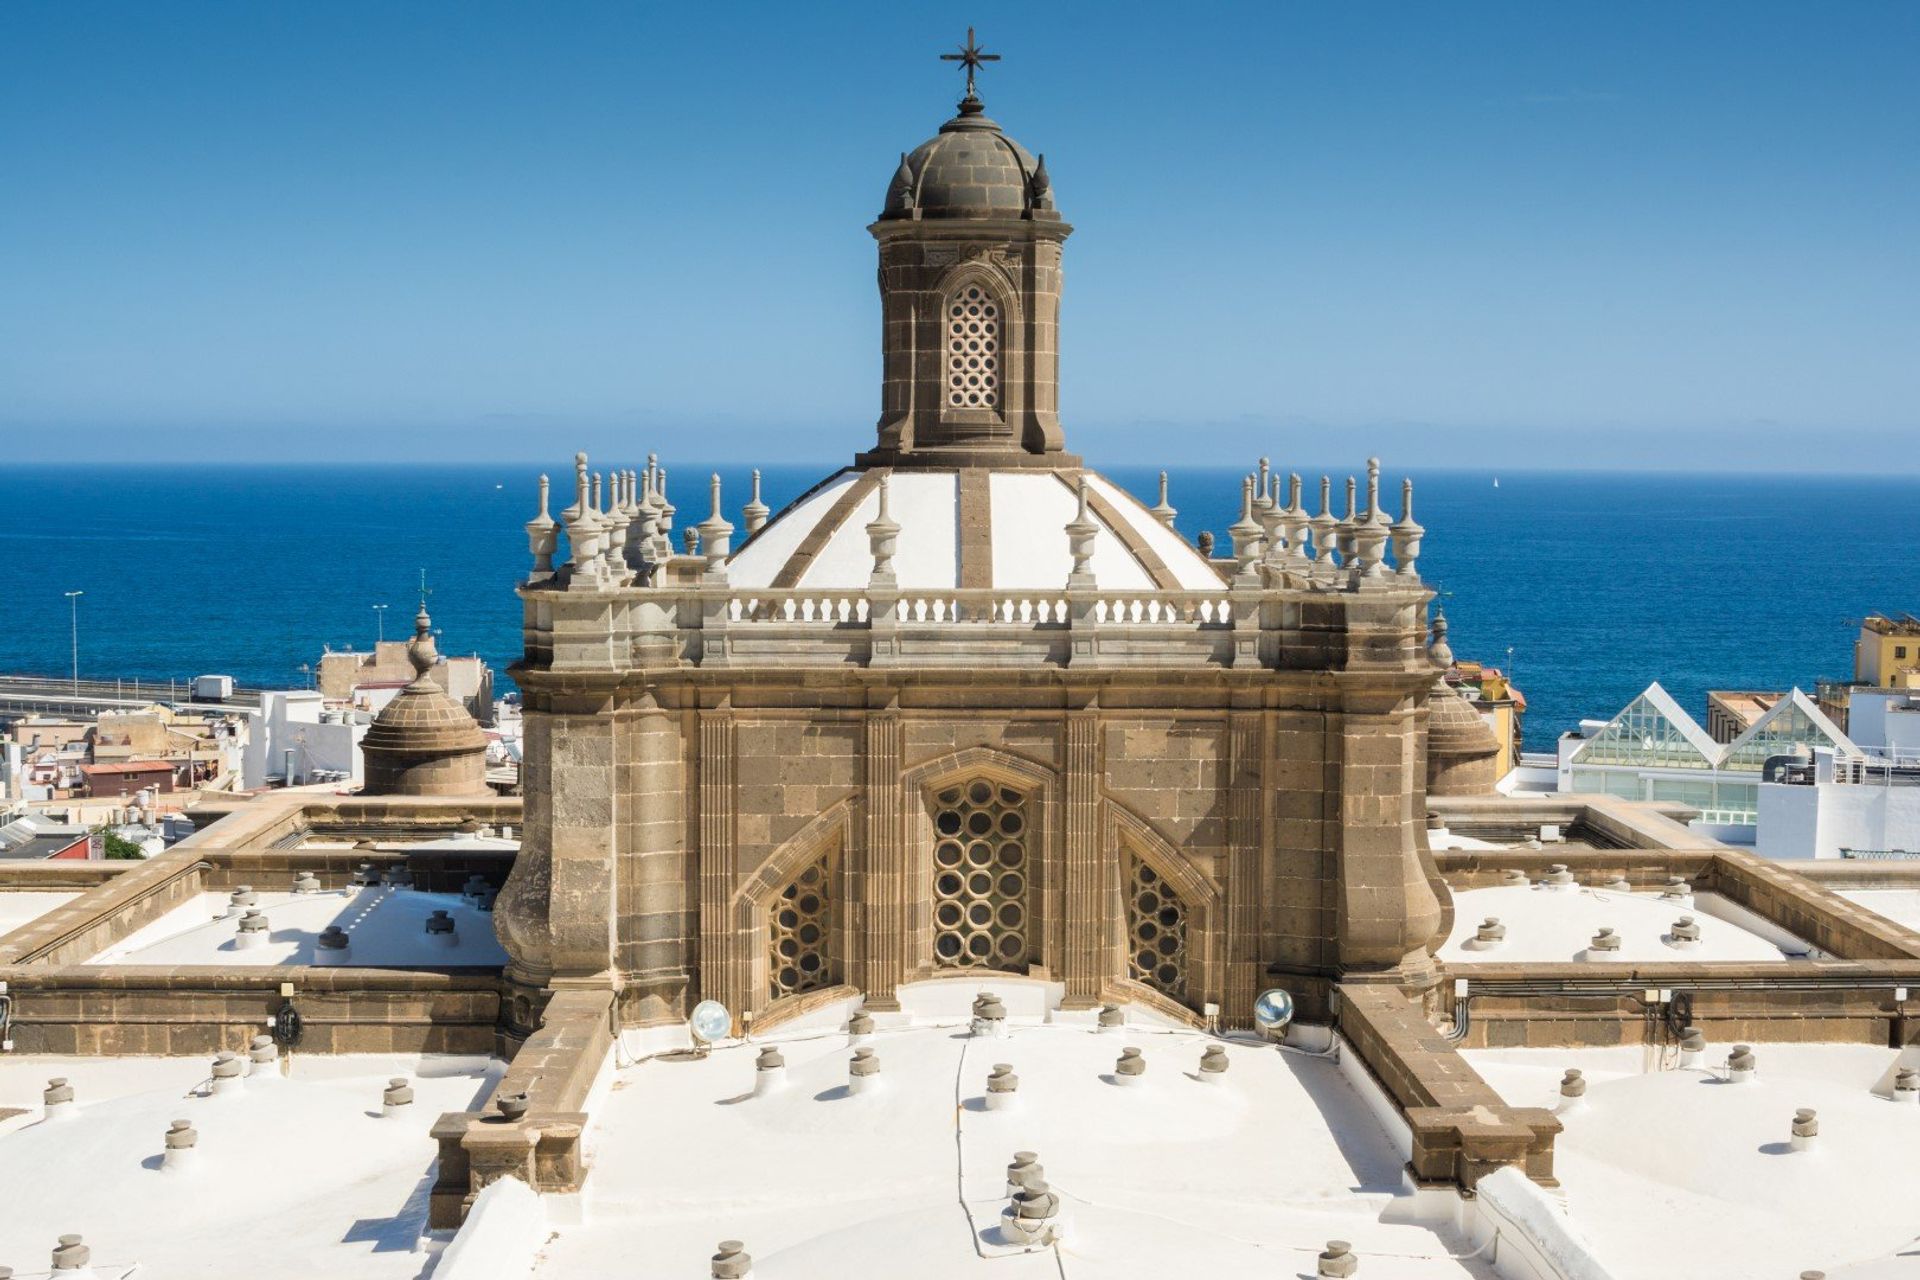 The white dome of Santa Ana Cathedral against the blue Atlantic Ocean in Las Palmas